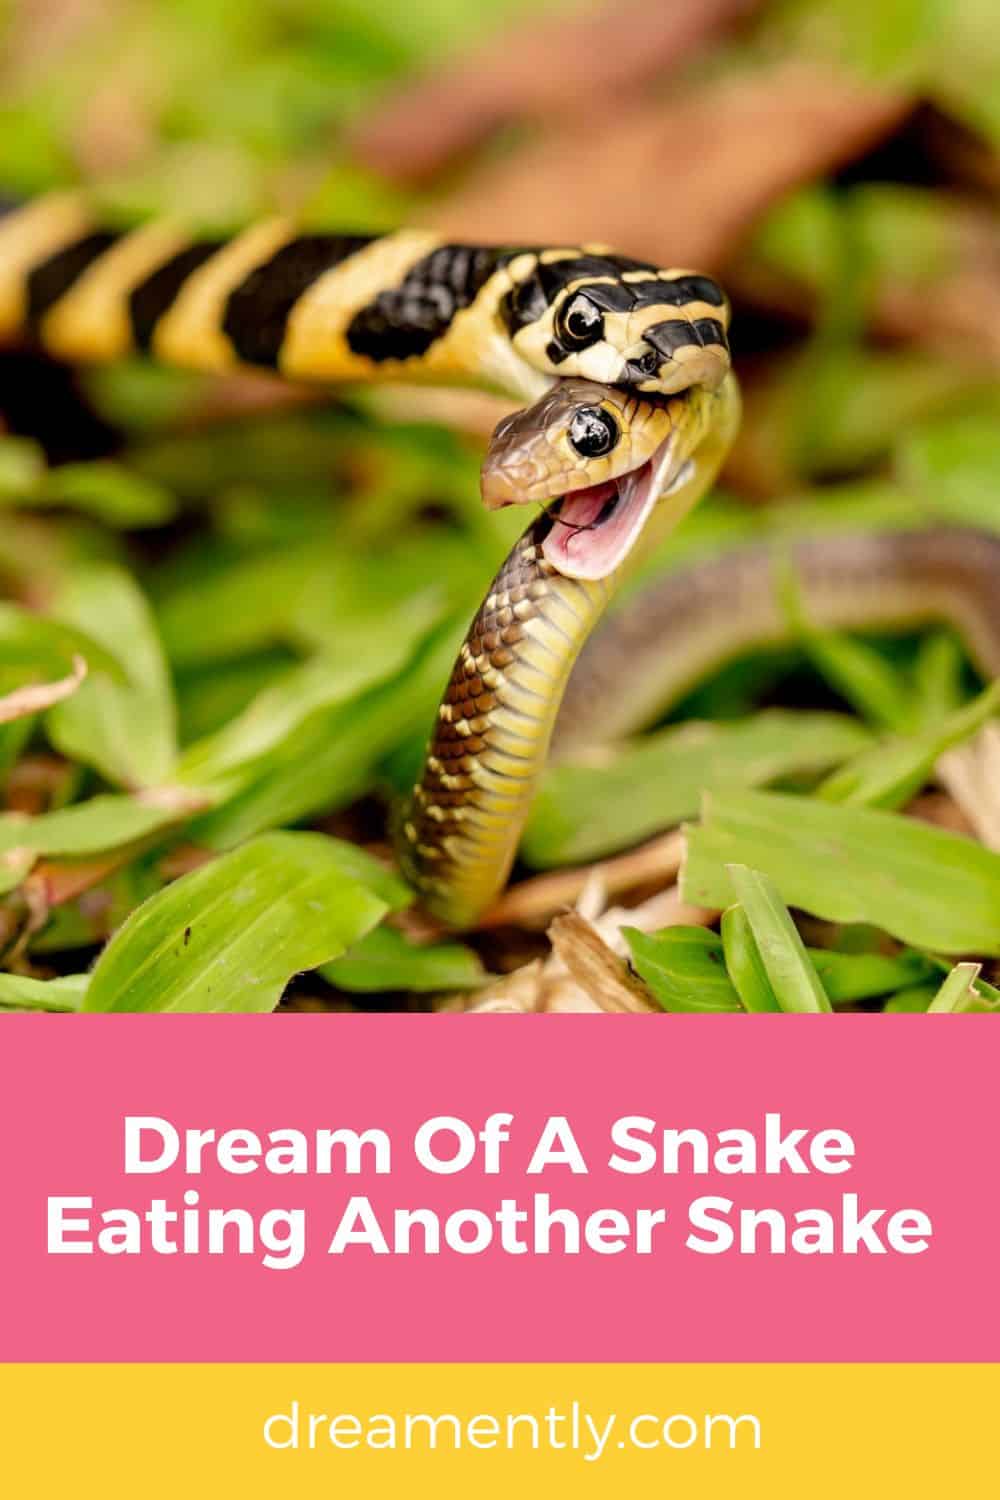 Dream Of A Snake Eating Another Snake